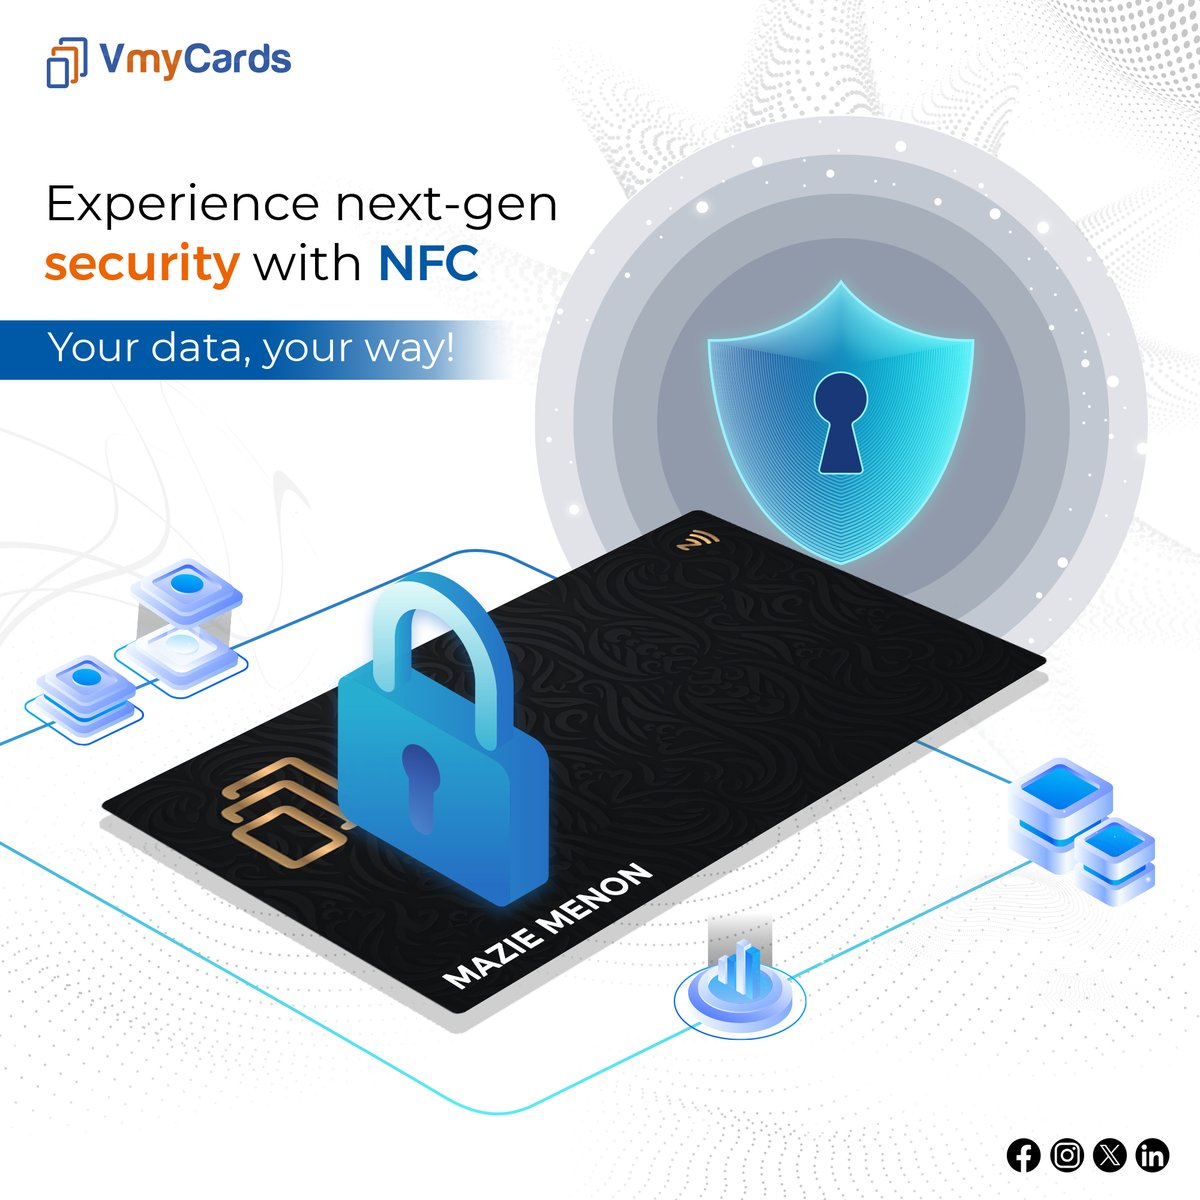 The future of security and tech marvel right in your pocket💳🔐
.
.
.
.
#secure #securetechnology #nfcsecure #nfconversation #nfccard #VMyCards